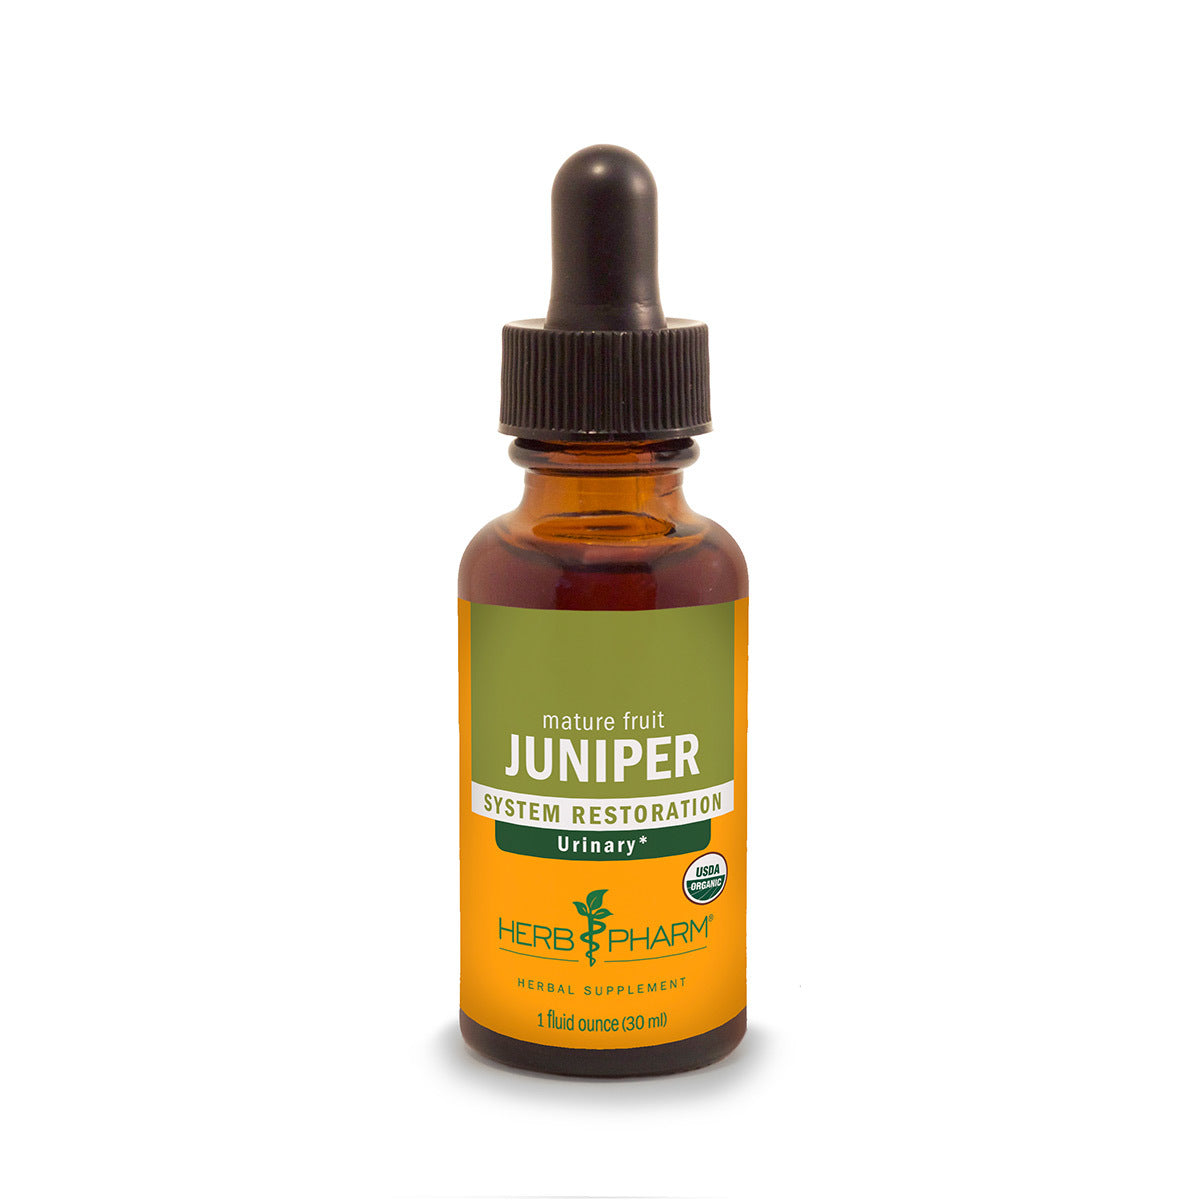 Primary image of Juniper Extract